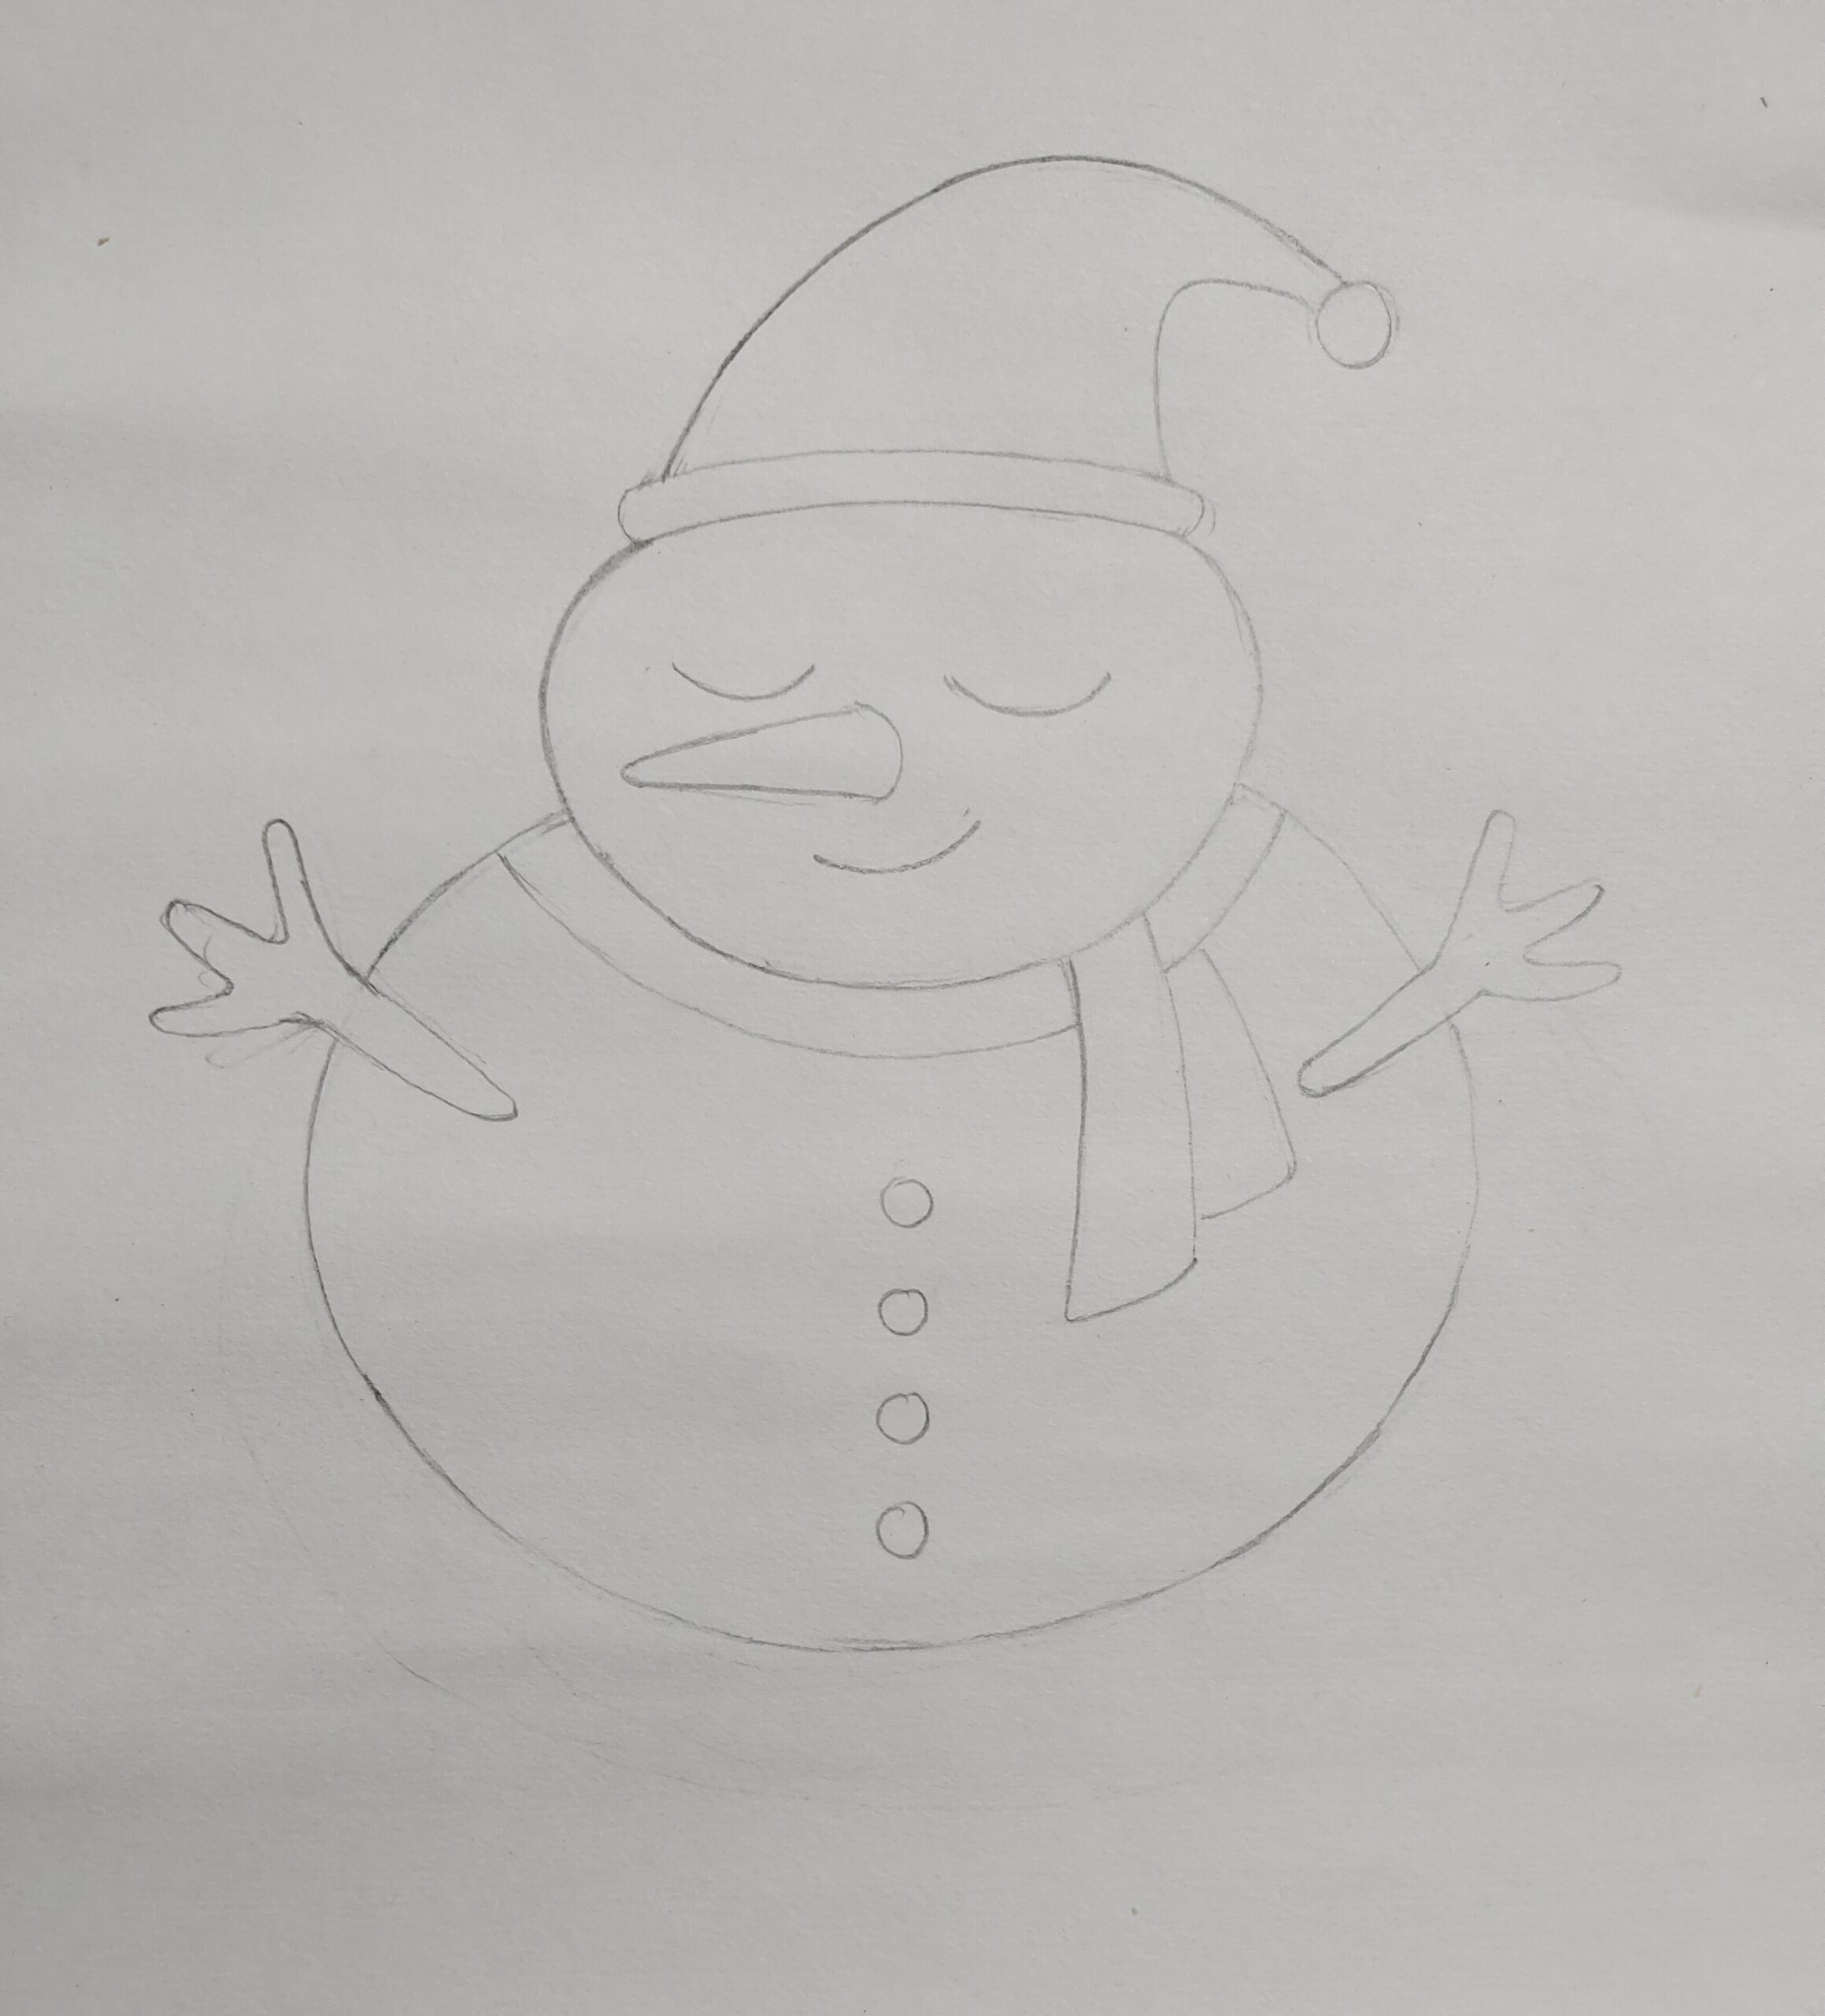 How to draw a Snowman Step by Step